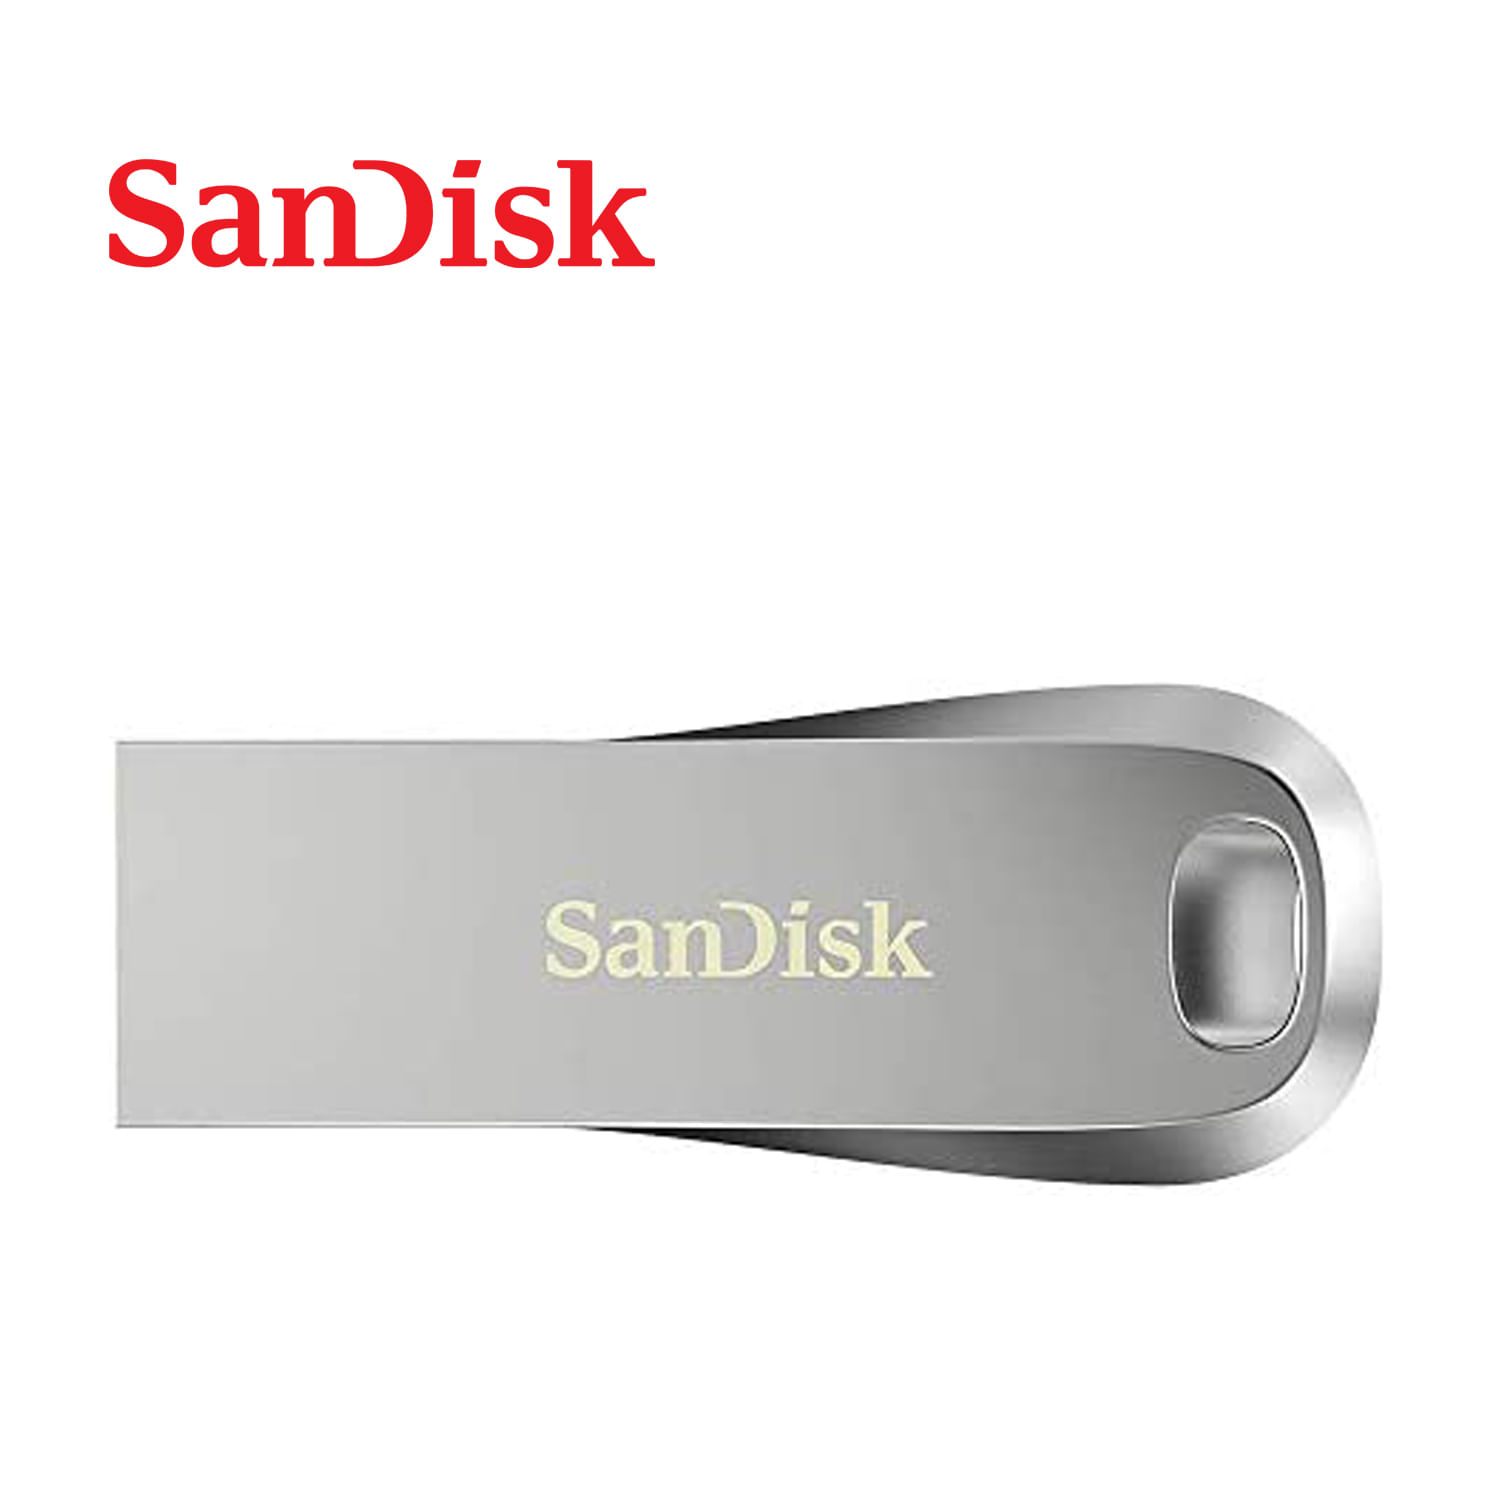 Memoria USB Sandisk Ultra Luxe 512GB 3.1 Flash Drive 150Mb/s - SDCZ74-512G-G46